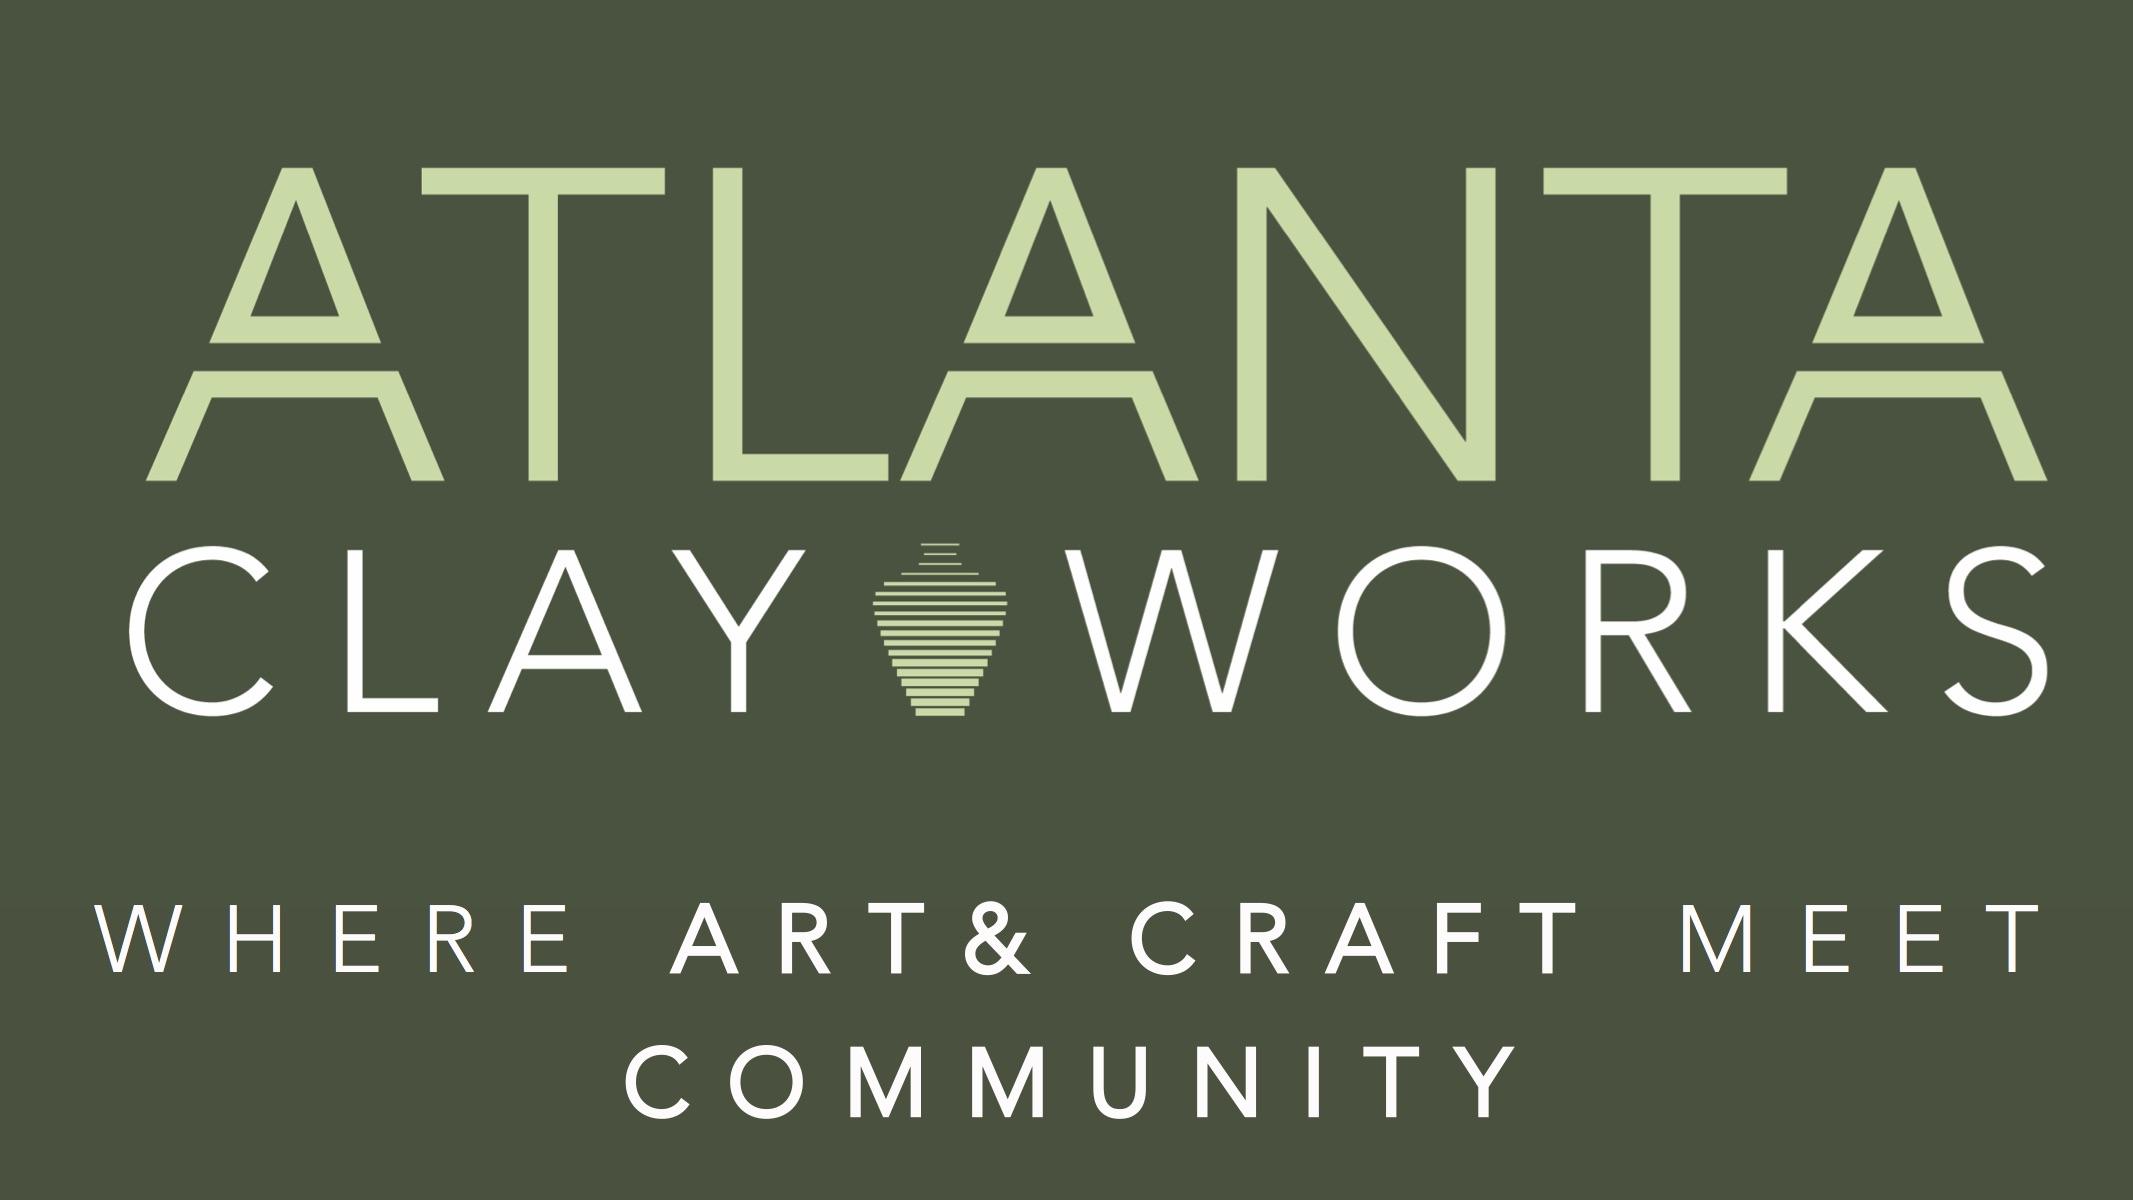 Beer & Gnomes: Fundraiser for Atlanta Clay Works Summer 2017